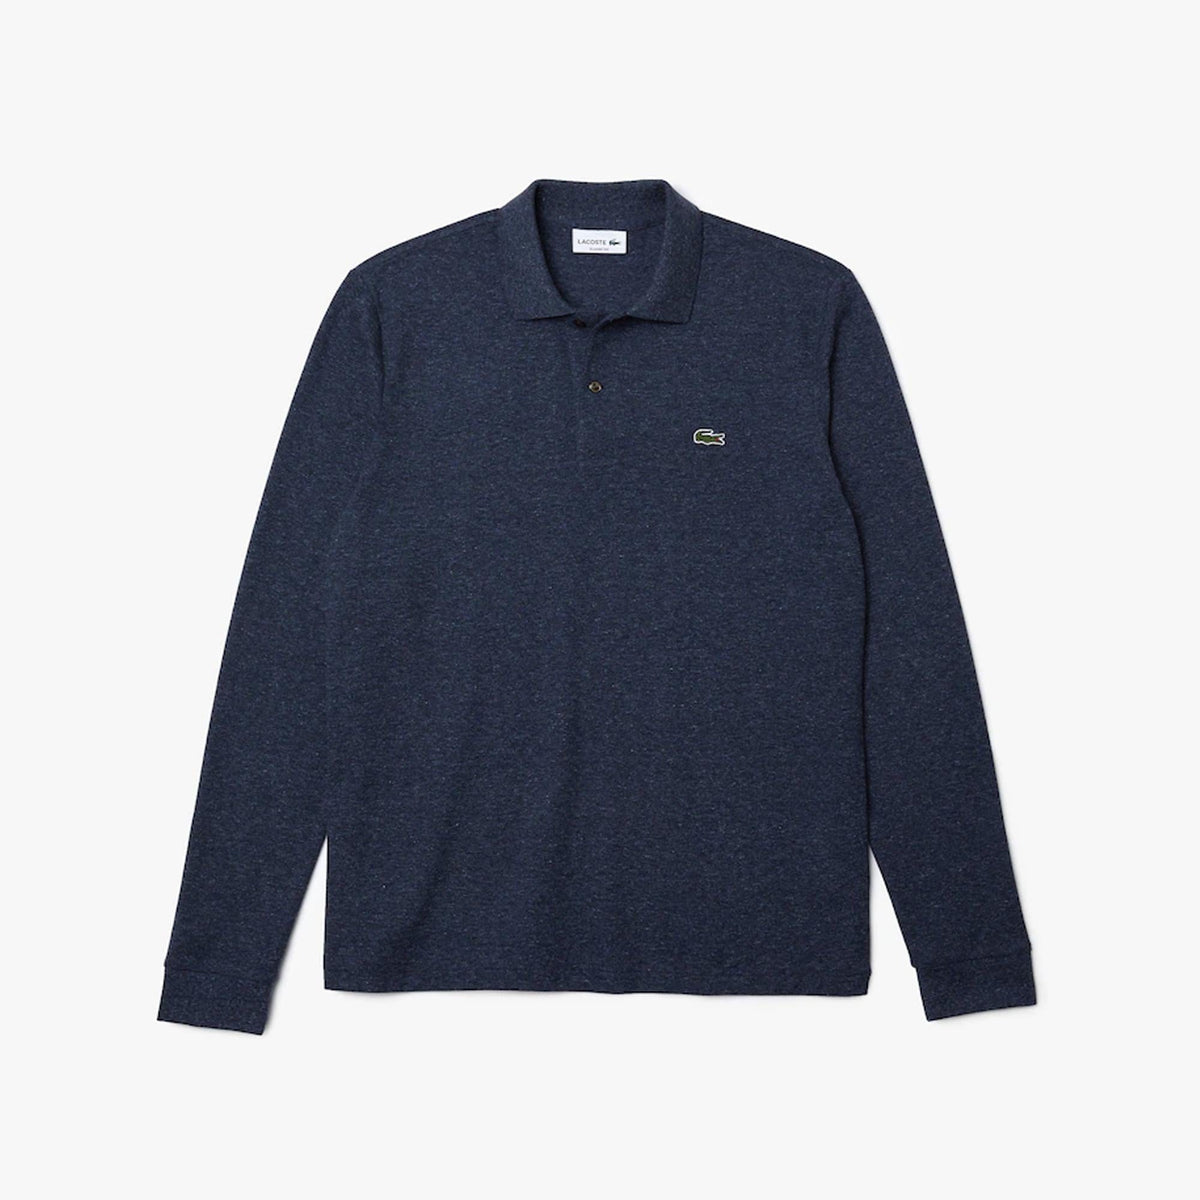 Lacoste Polo Shirts Lacoste Evening Blue Heather Polo Shirt